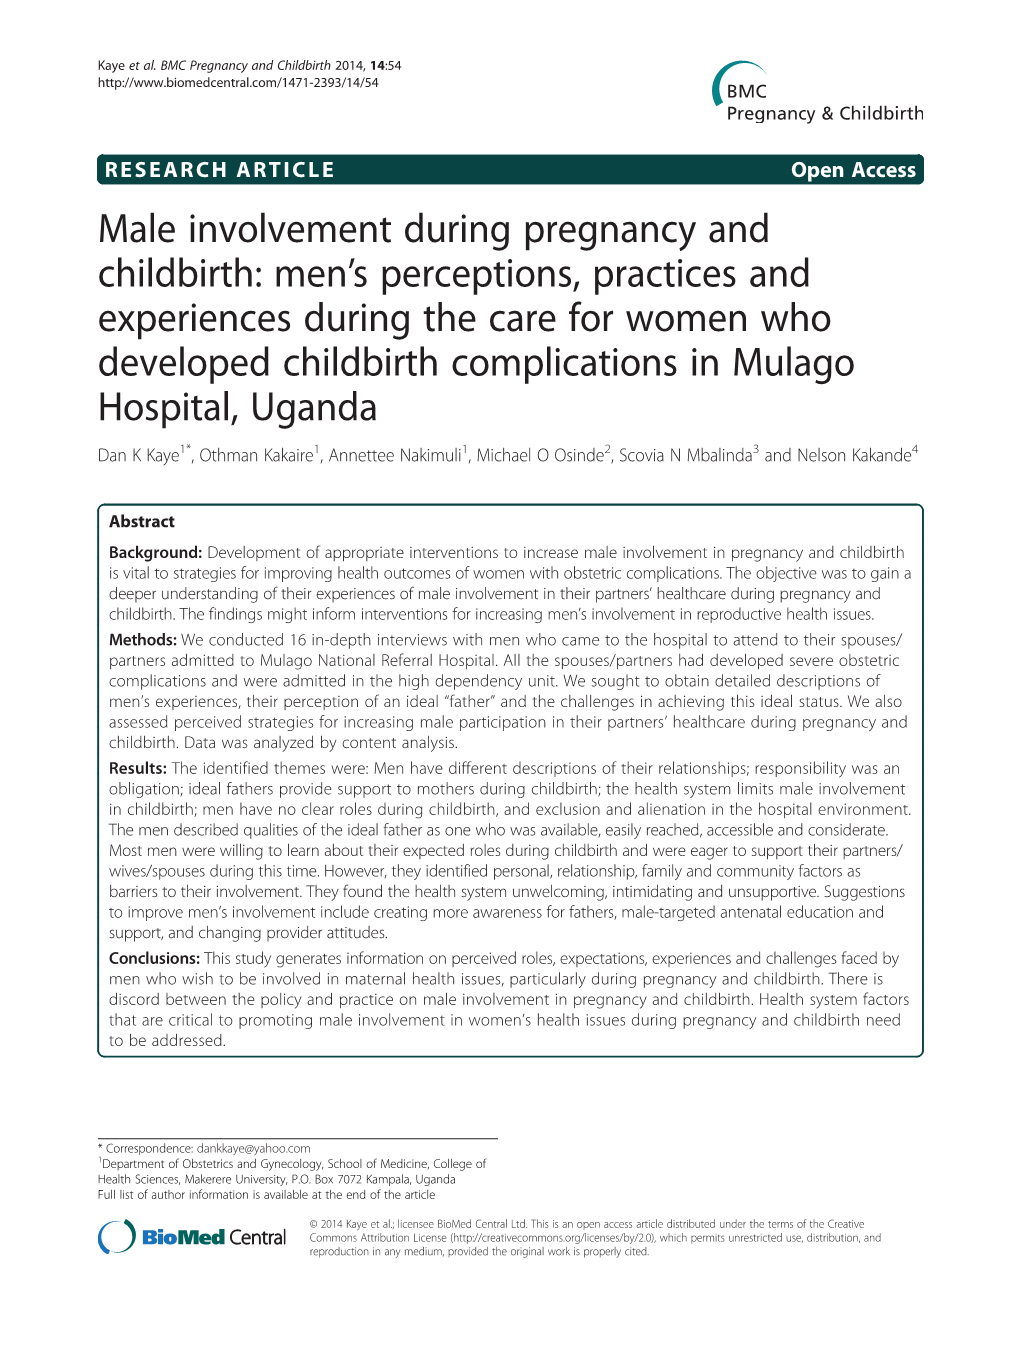 Male Involvement During Pregnancy and Childbirth: Men's Perceptions